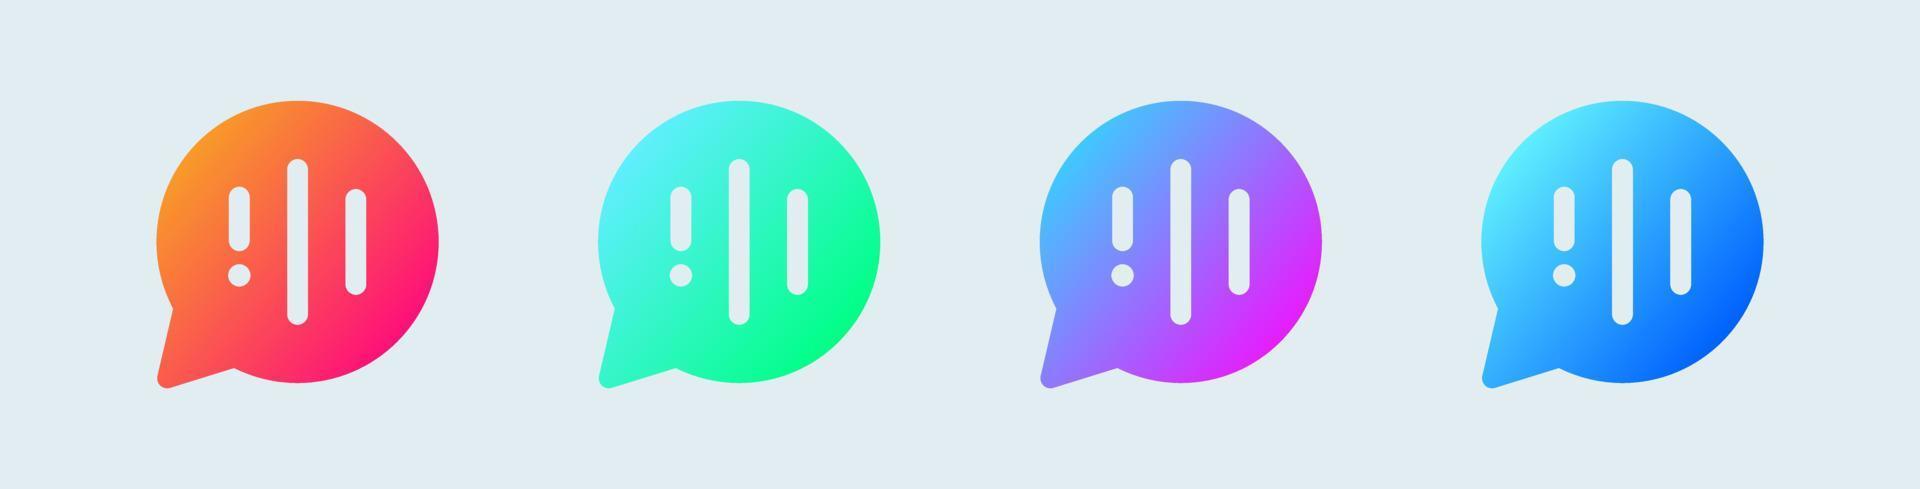 Voice solid icon in gradient colors. Sound wave signs vector illustration.